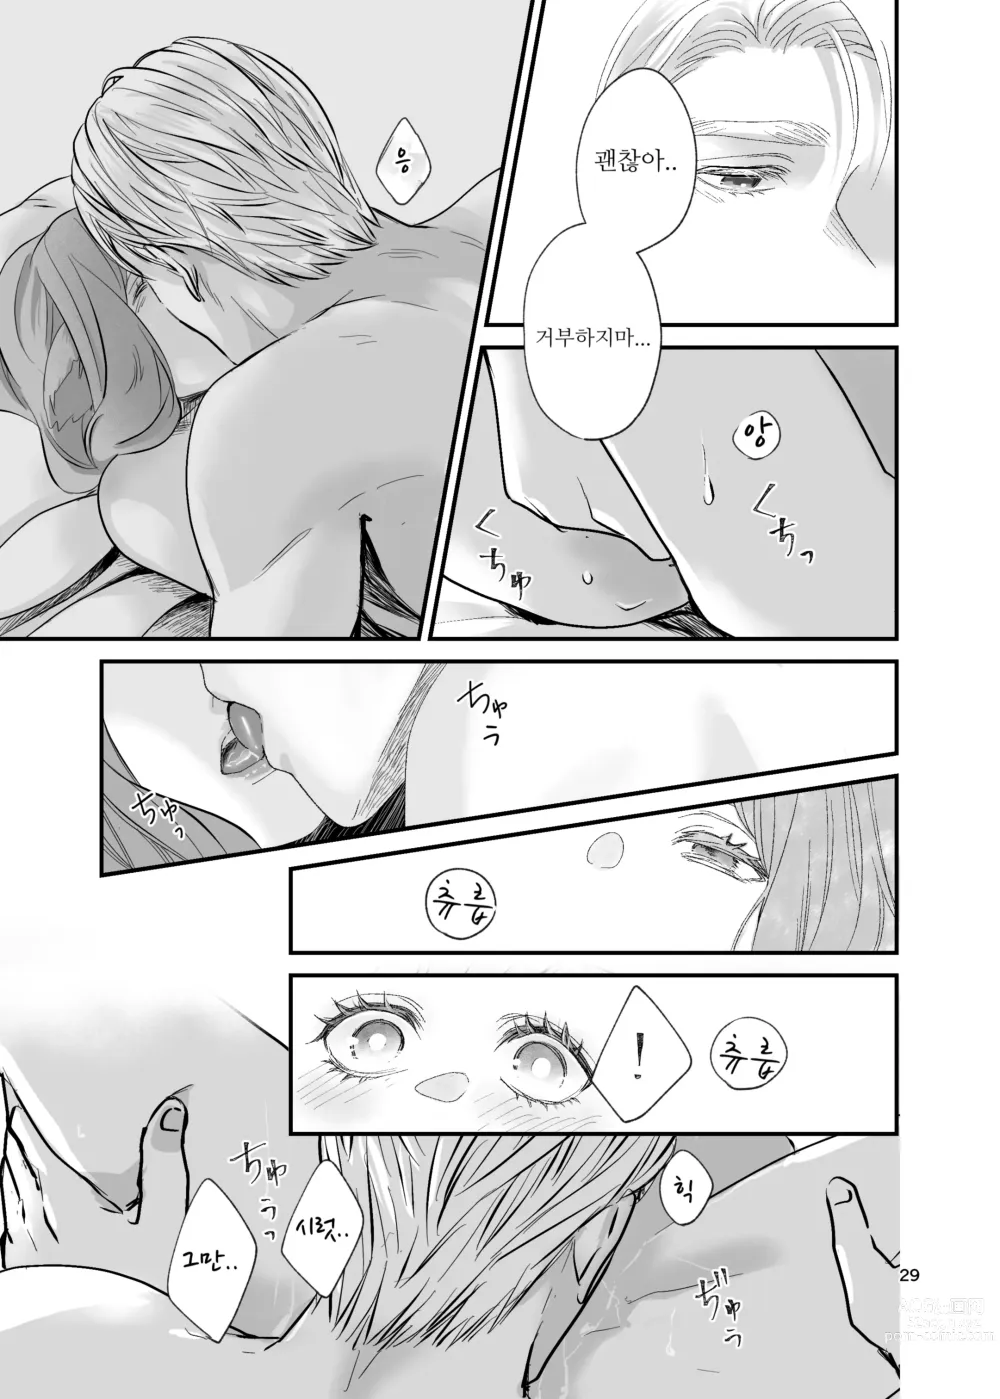 Page 29 of doujinshi 수인 영애와 혼약자